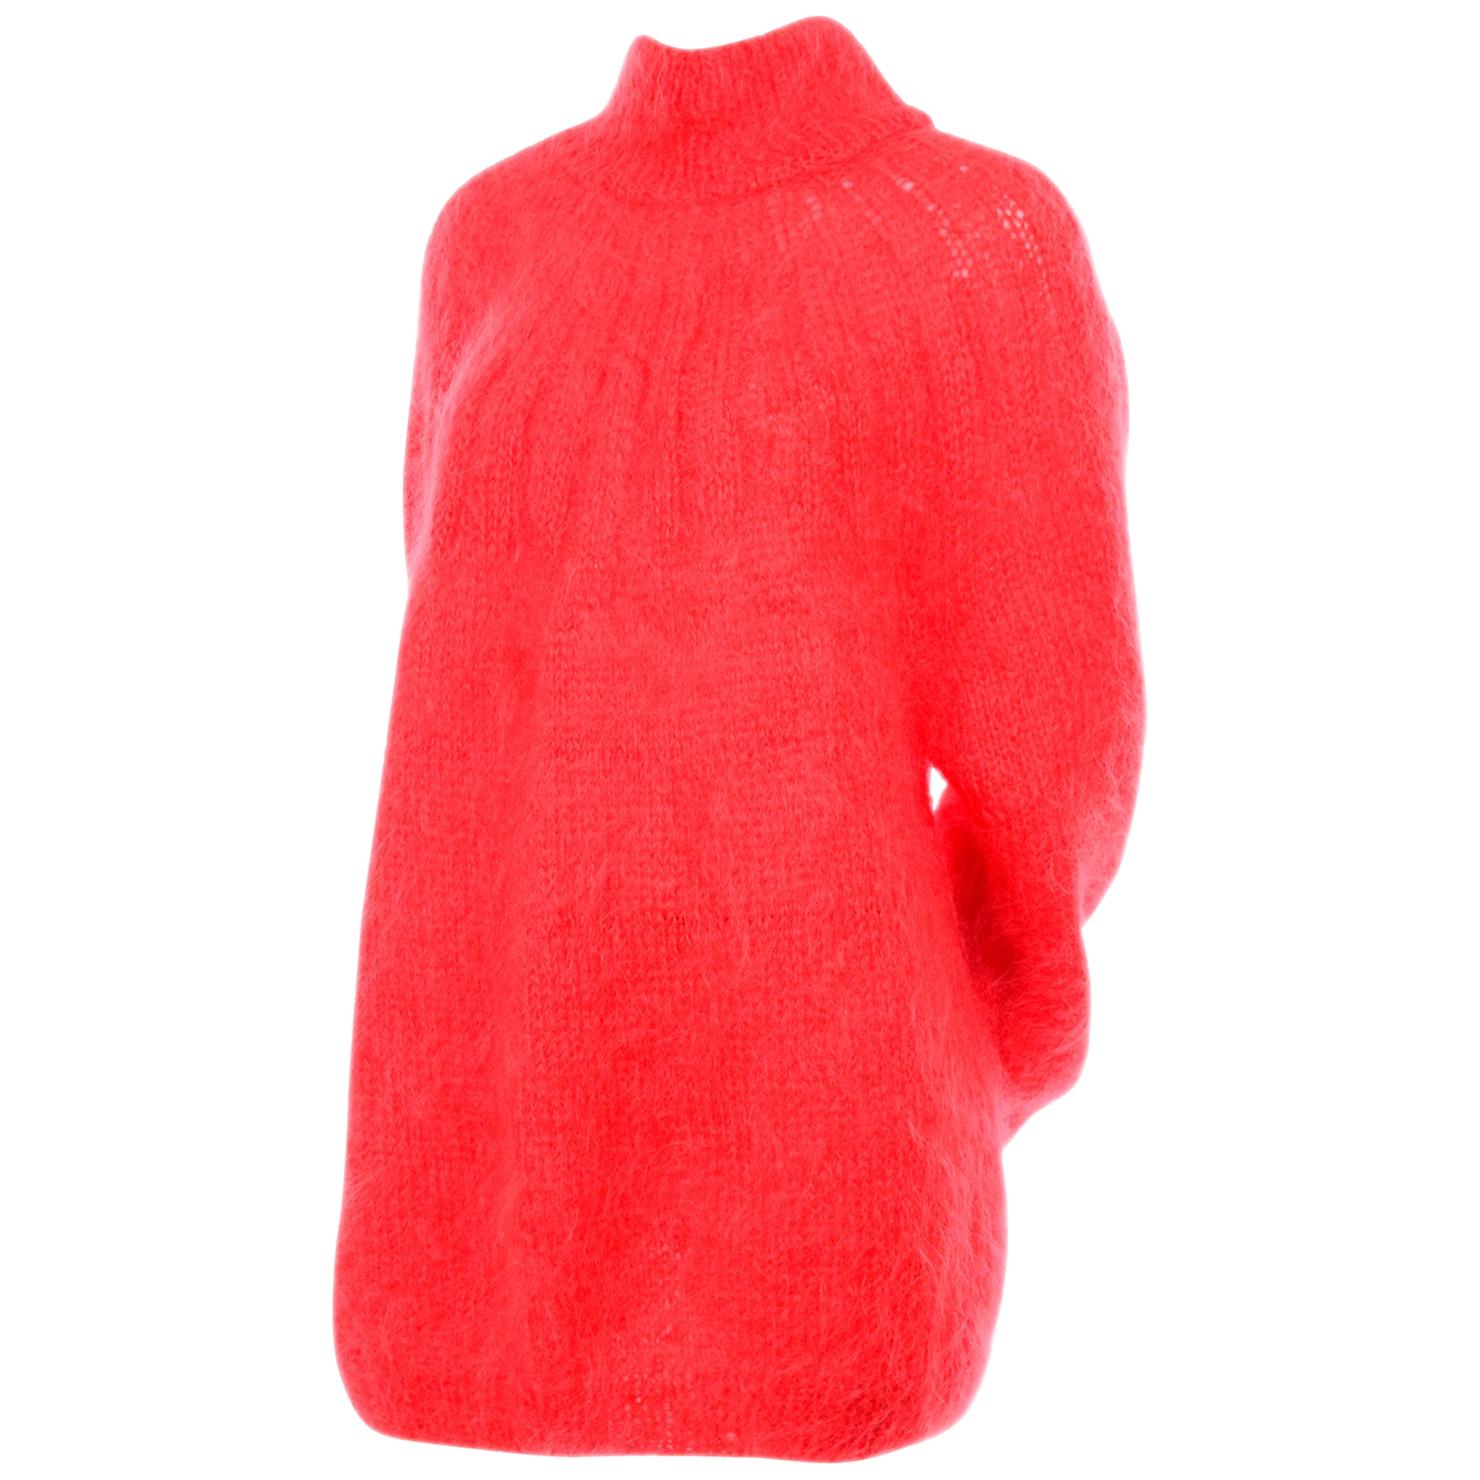 Italian Made 1980s Mohair Blend Coral Oversized Sweater or Sweater Dress 